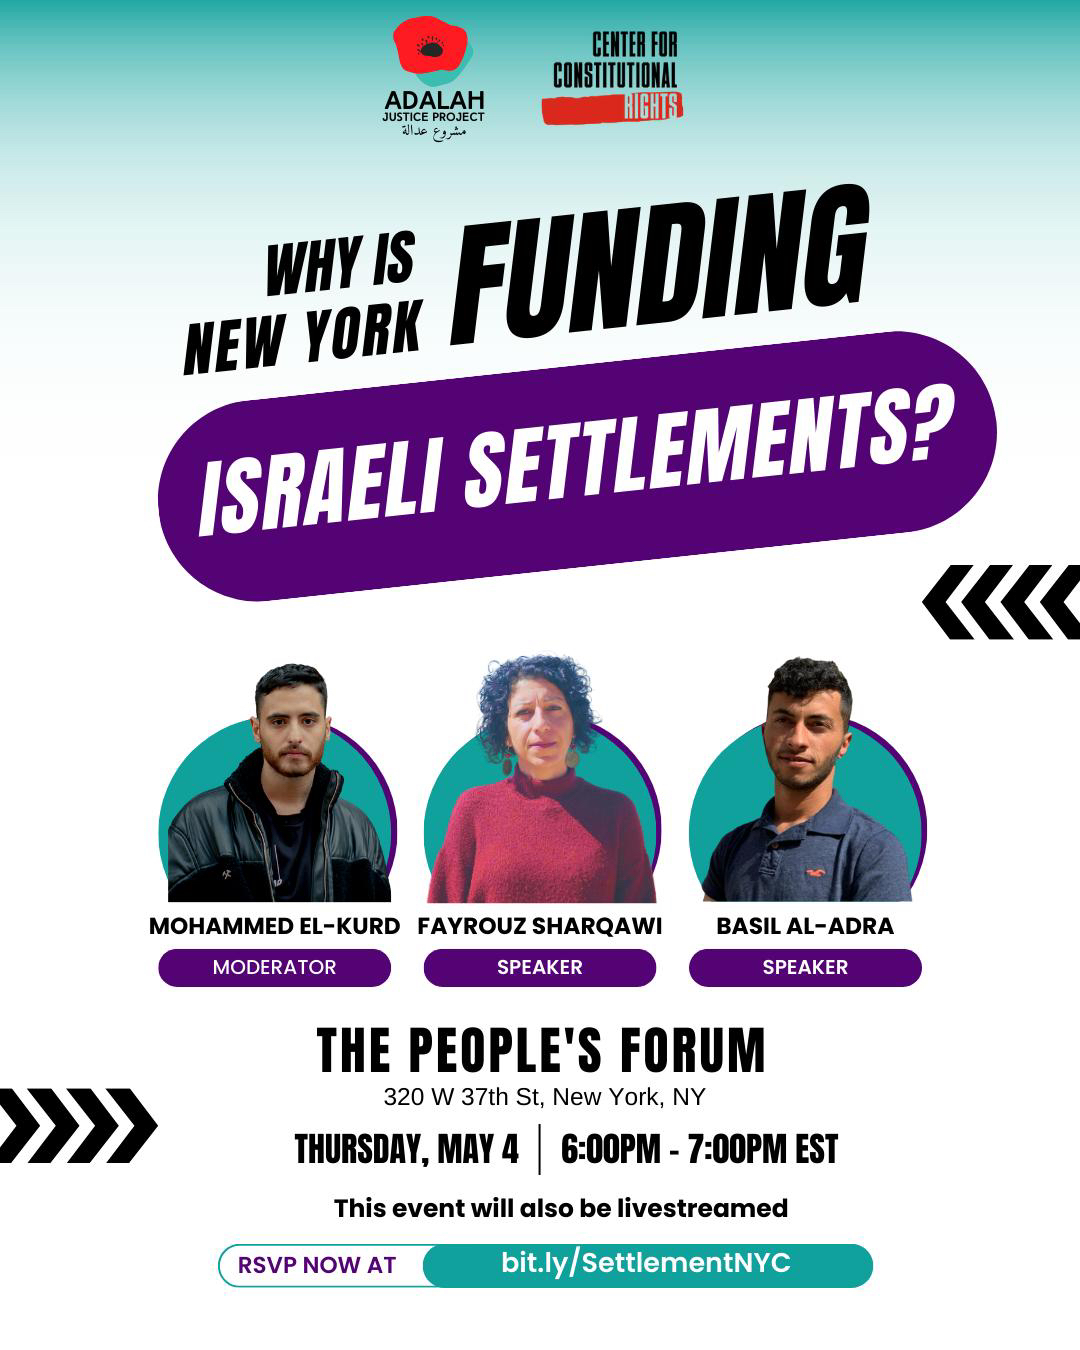 Flyer for the 'Why Is New York Funding Israeli Settlement?' event. The speakers are shown - Mohammed El-Kurd, Fayrouz Sharqawi and  Basil Al-Adra. The details for the event time, date and location are also shown. It will take place at The Peoples Forum at 6pm on Thurs May 4. There is an RSVP link in the image as well, which is bit.ly/SettlementNYC 